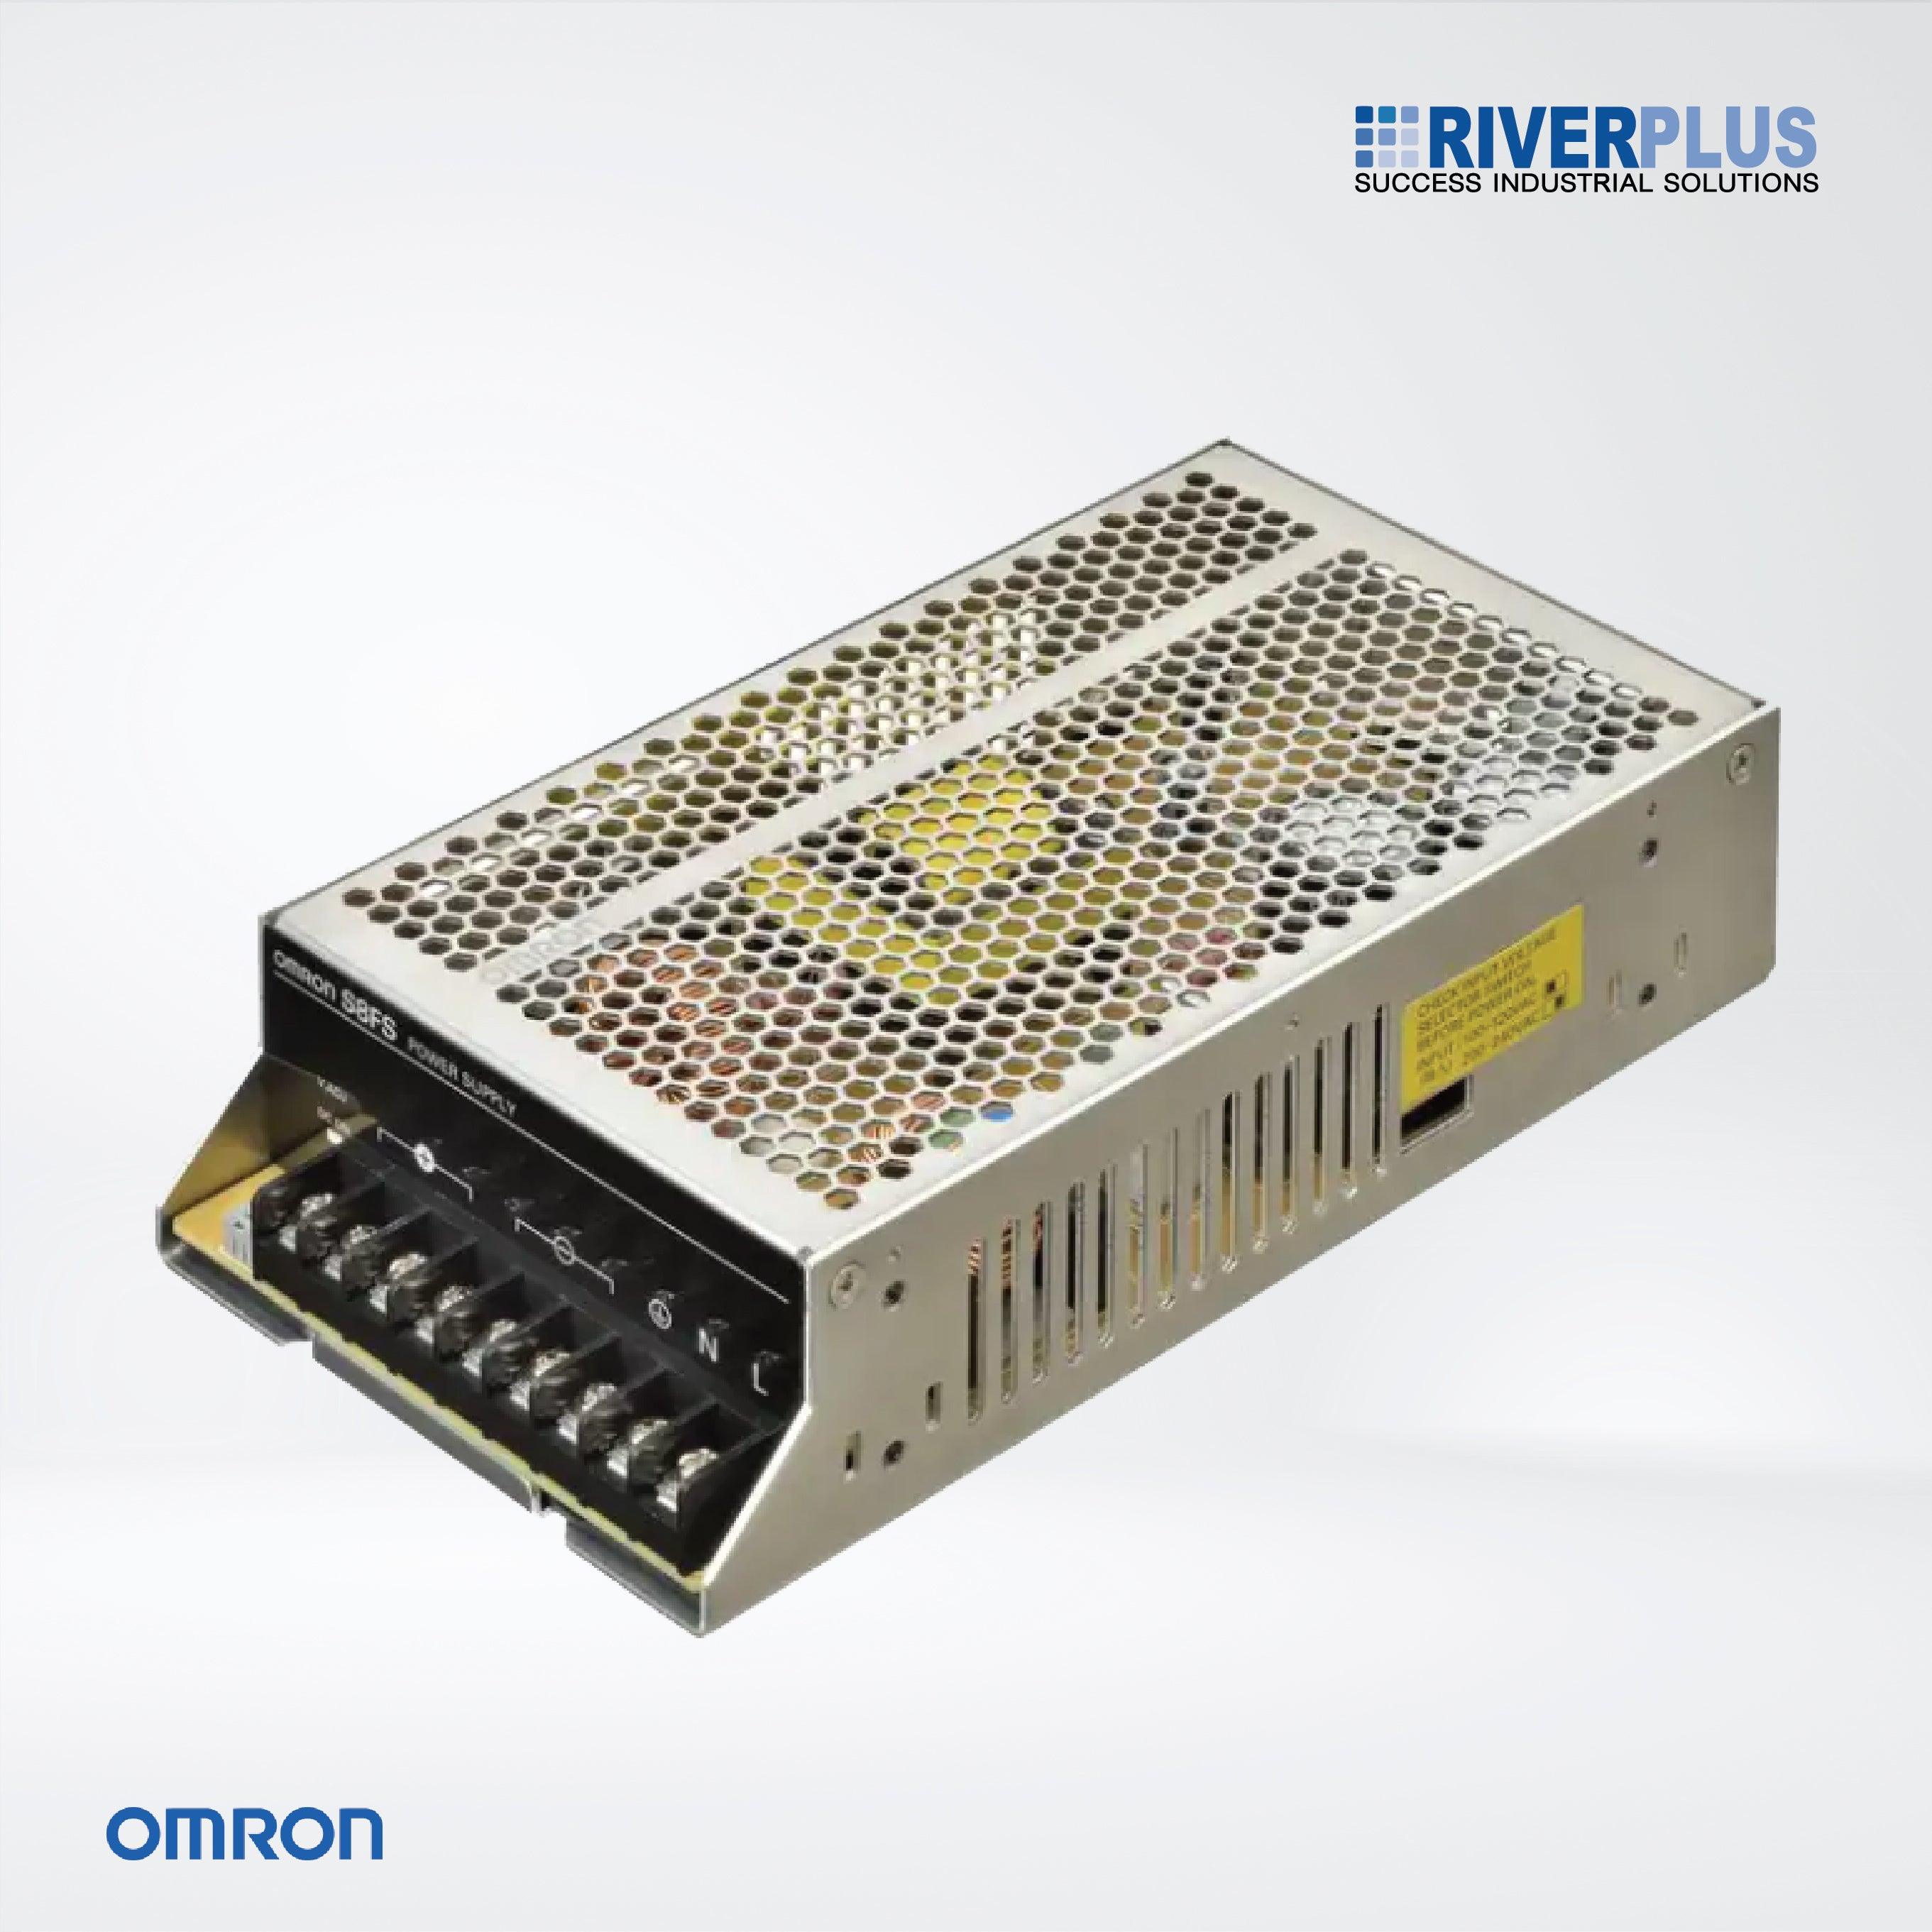 S8FS-C20005J Switch Mode Power Supply ,200 W , 5VDC ,Model with terminal block facing forward - Riverplus